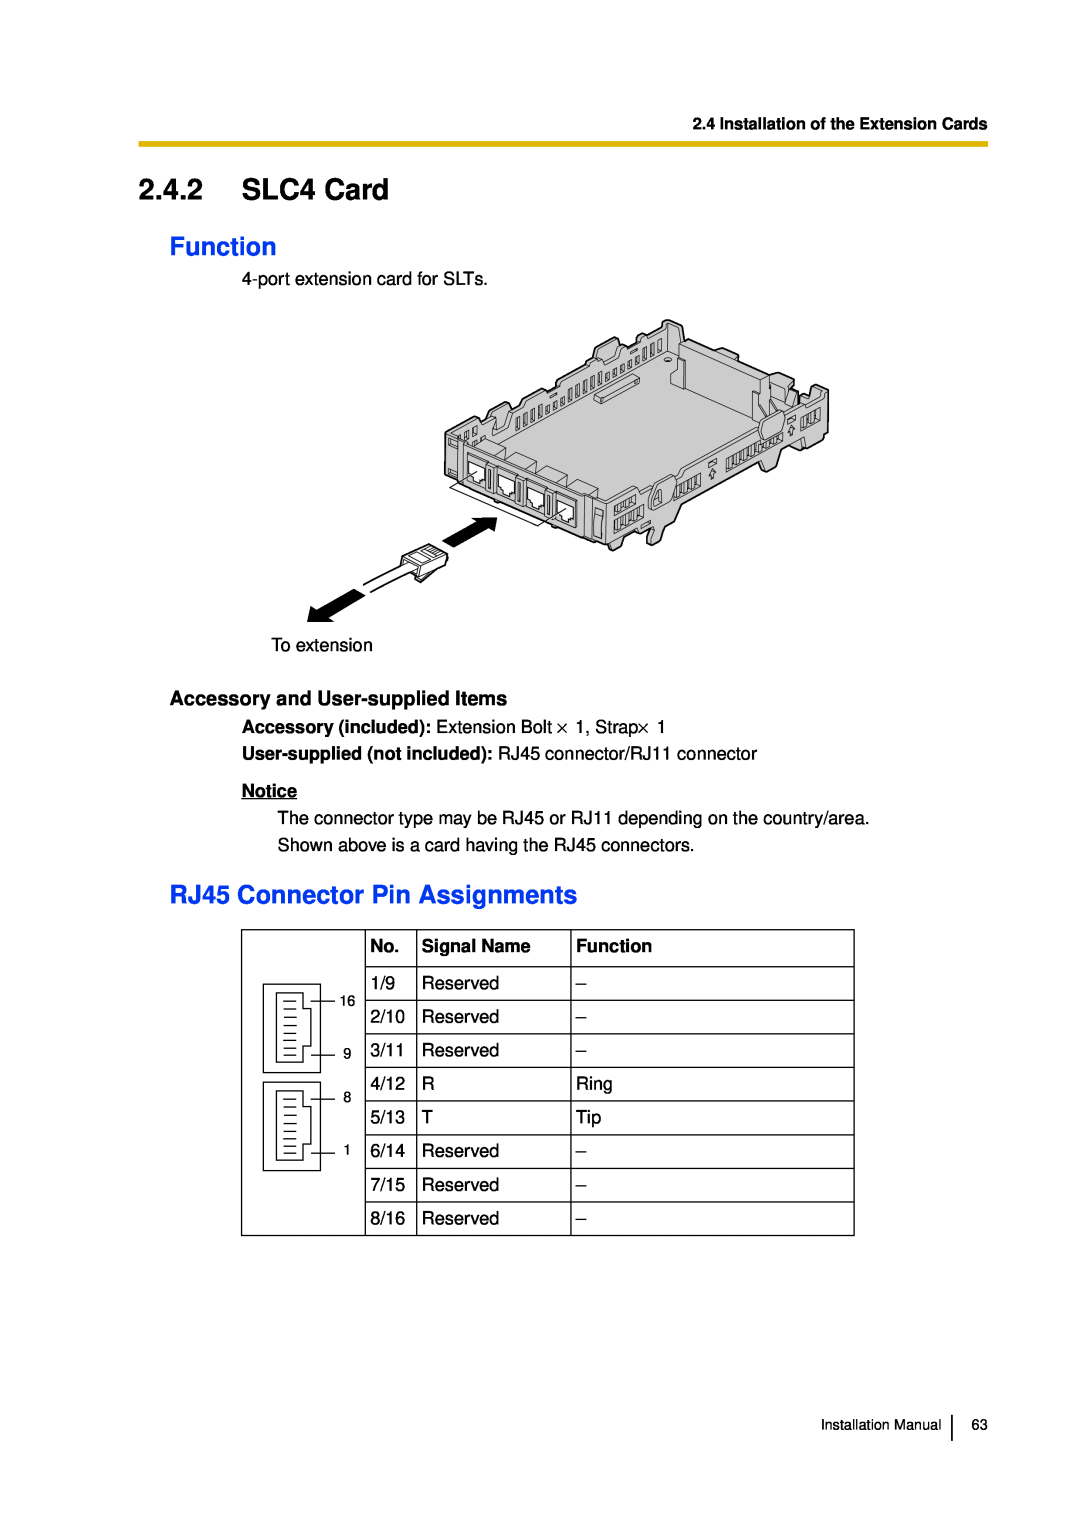 Panasonic KX-TDA30 installation manual 2.4.2SLC4 Card, Function, RJ45 Connector Pin Assignments, Notice, Signal Name 